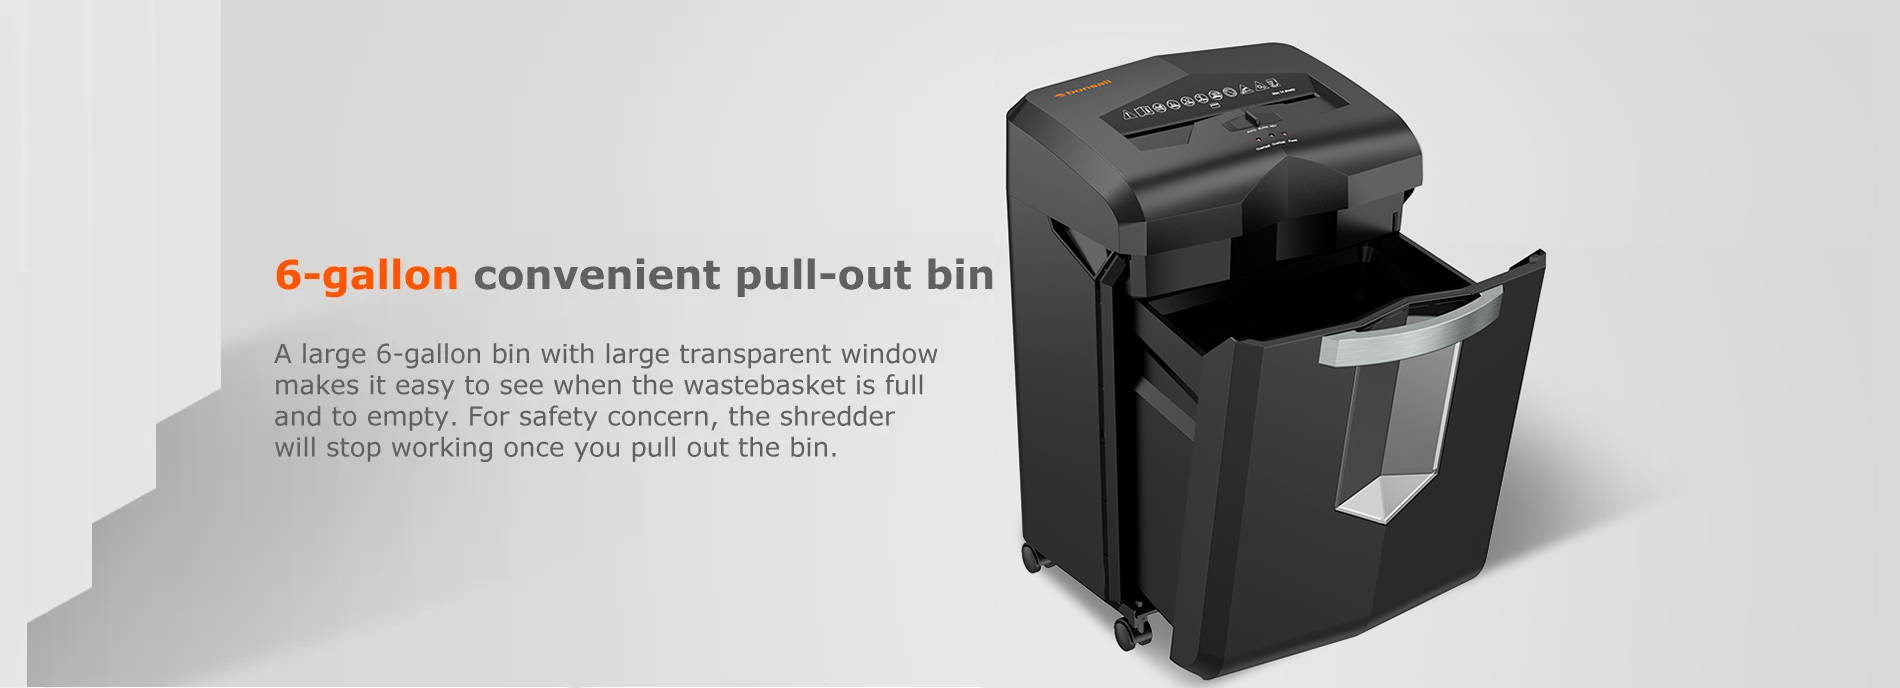 6-gallon convenient pull-out bin A large 6-gallon bin with large transparent window makes it easy to see when the wastebasket is full and to empty. For safety concern, the shredder will stop working once you pull out the bin